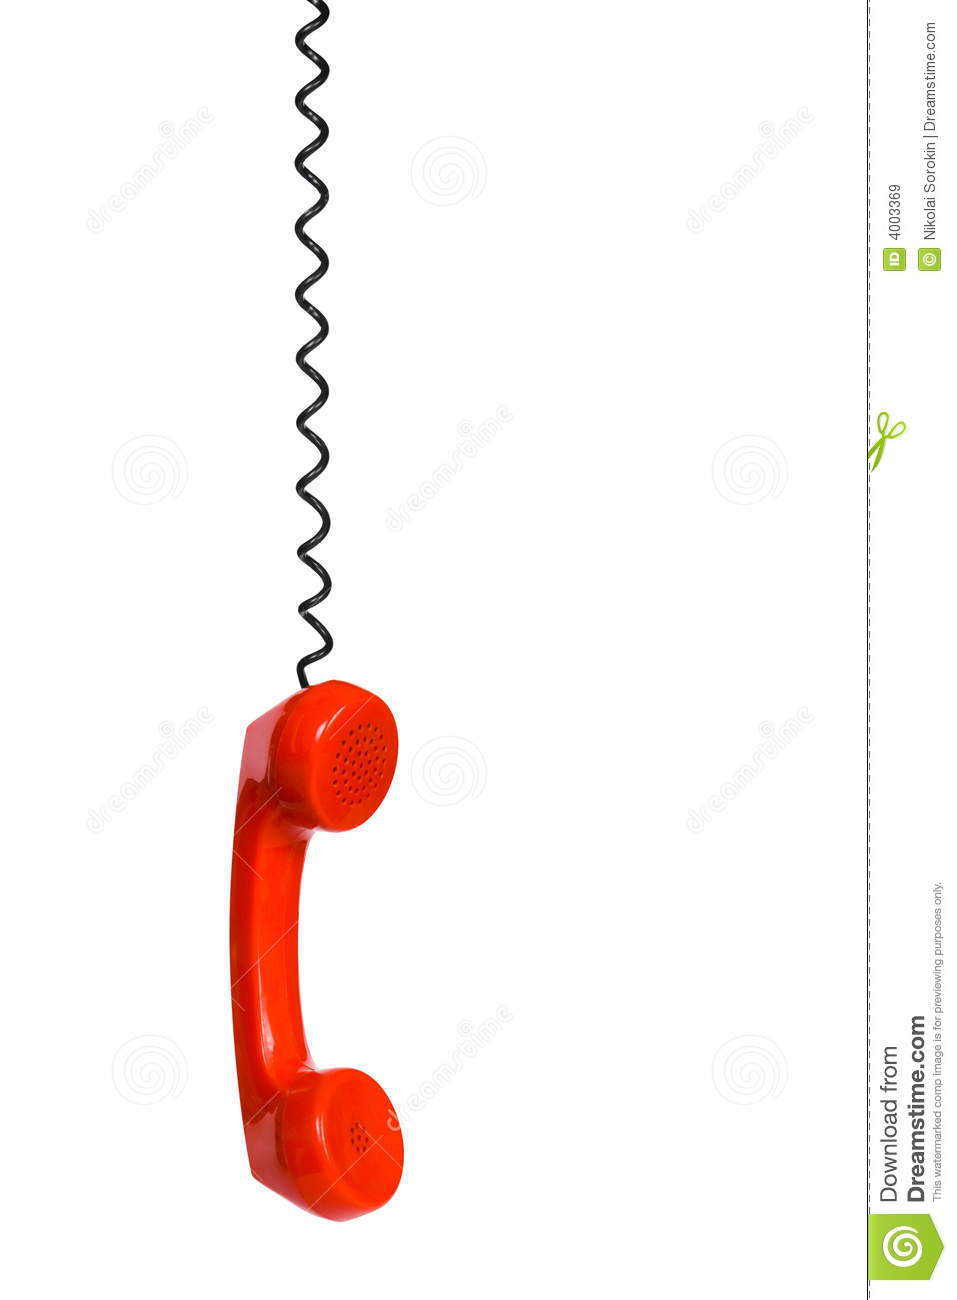 Telephone Receiver And Cord Royalty Free Stock Images   Image  4003369